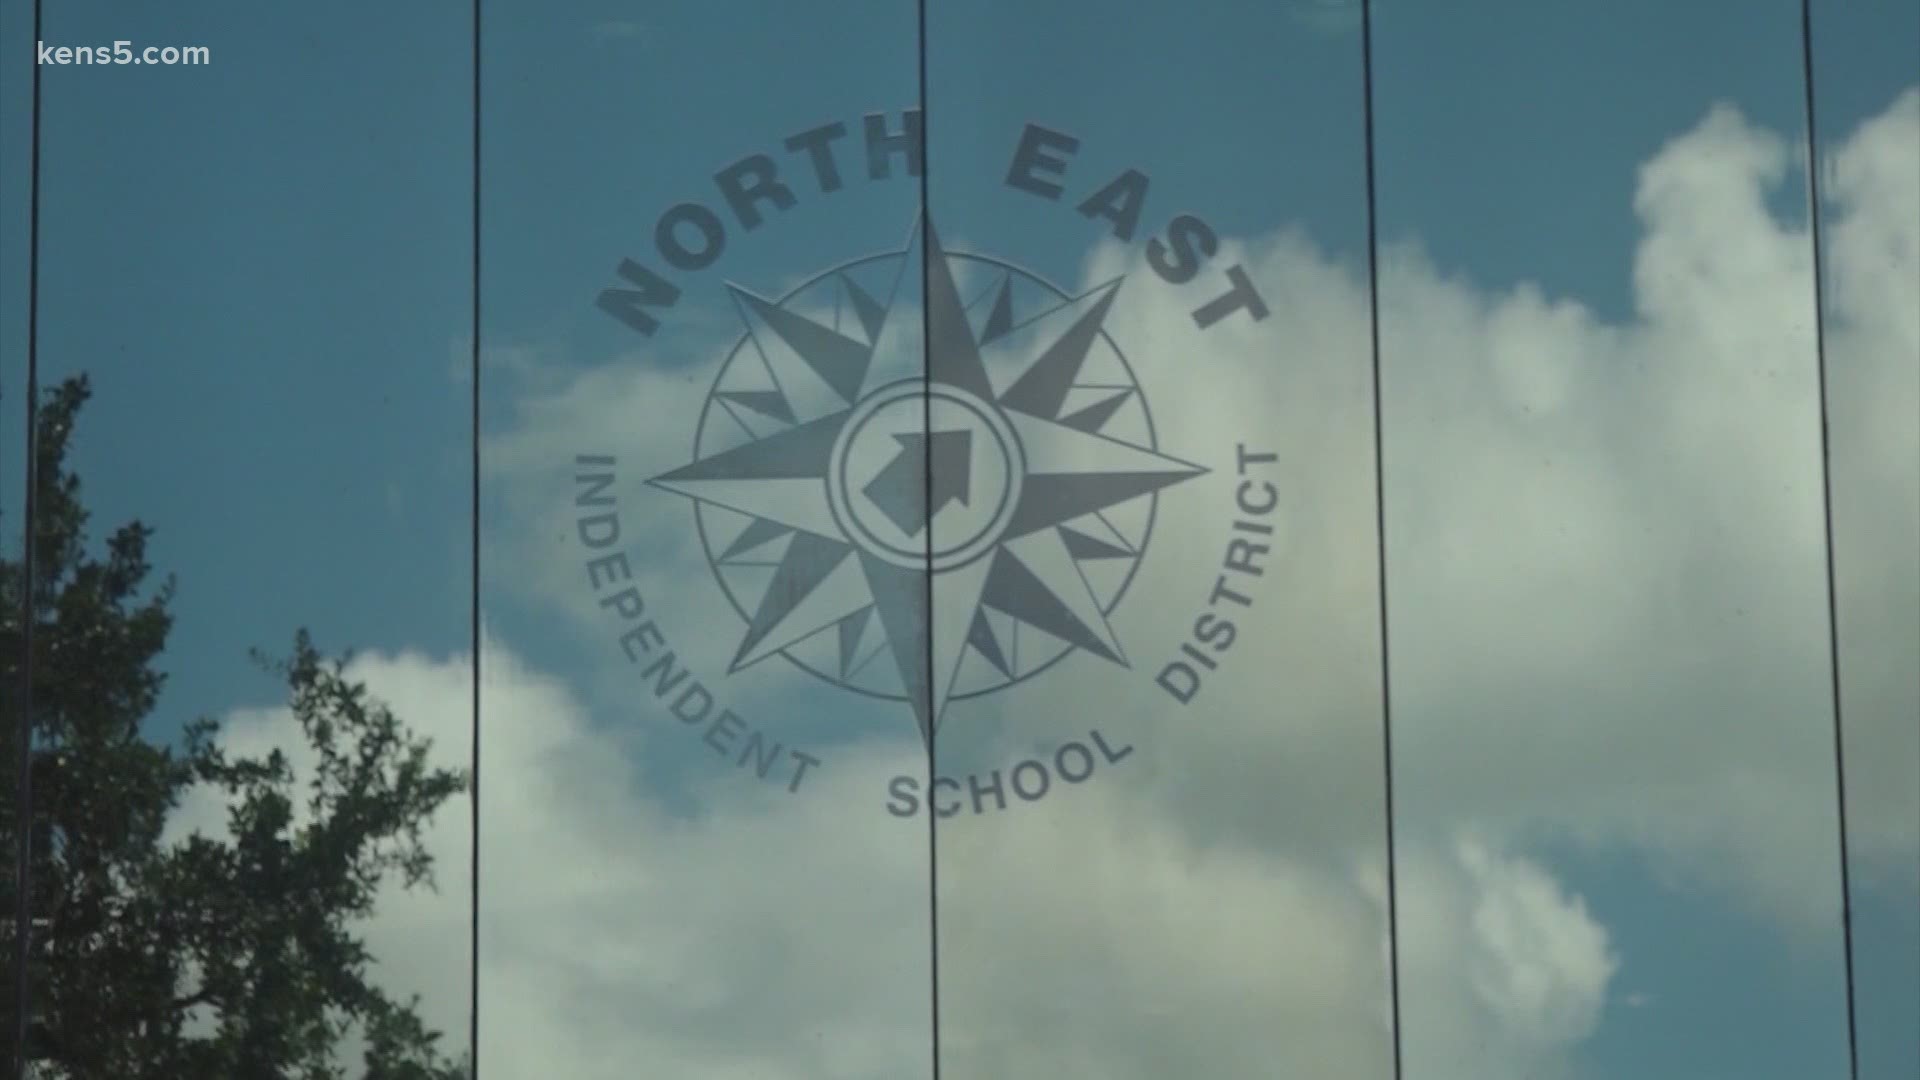 The district said in a post Monday that feedback from families caused them to reverse course. NEISD had said last week that they would not share about new cases.